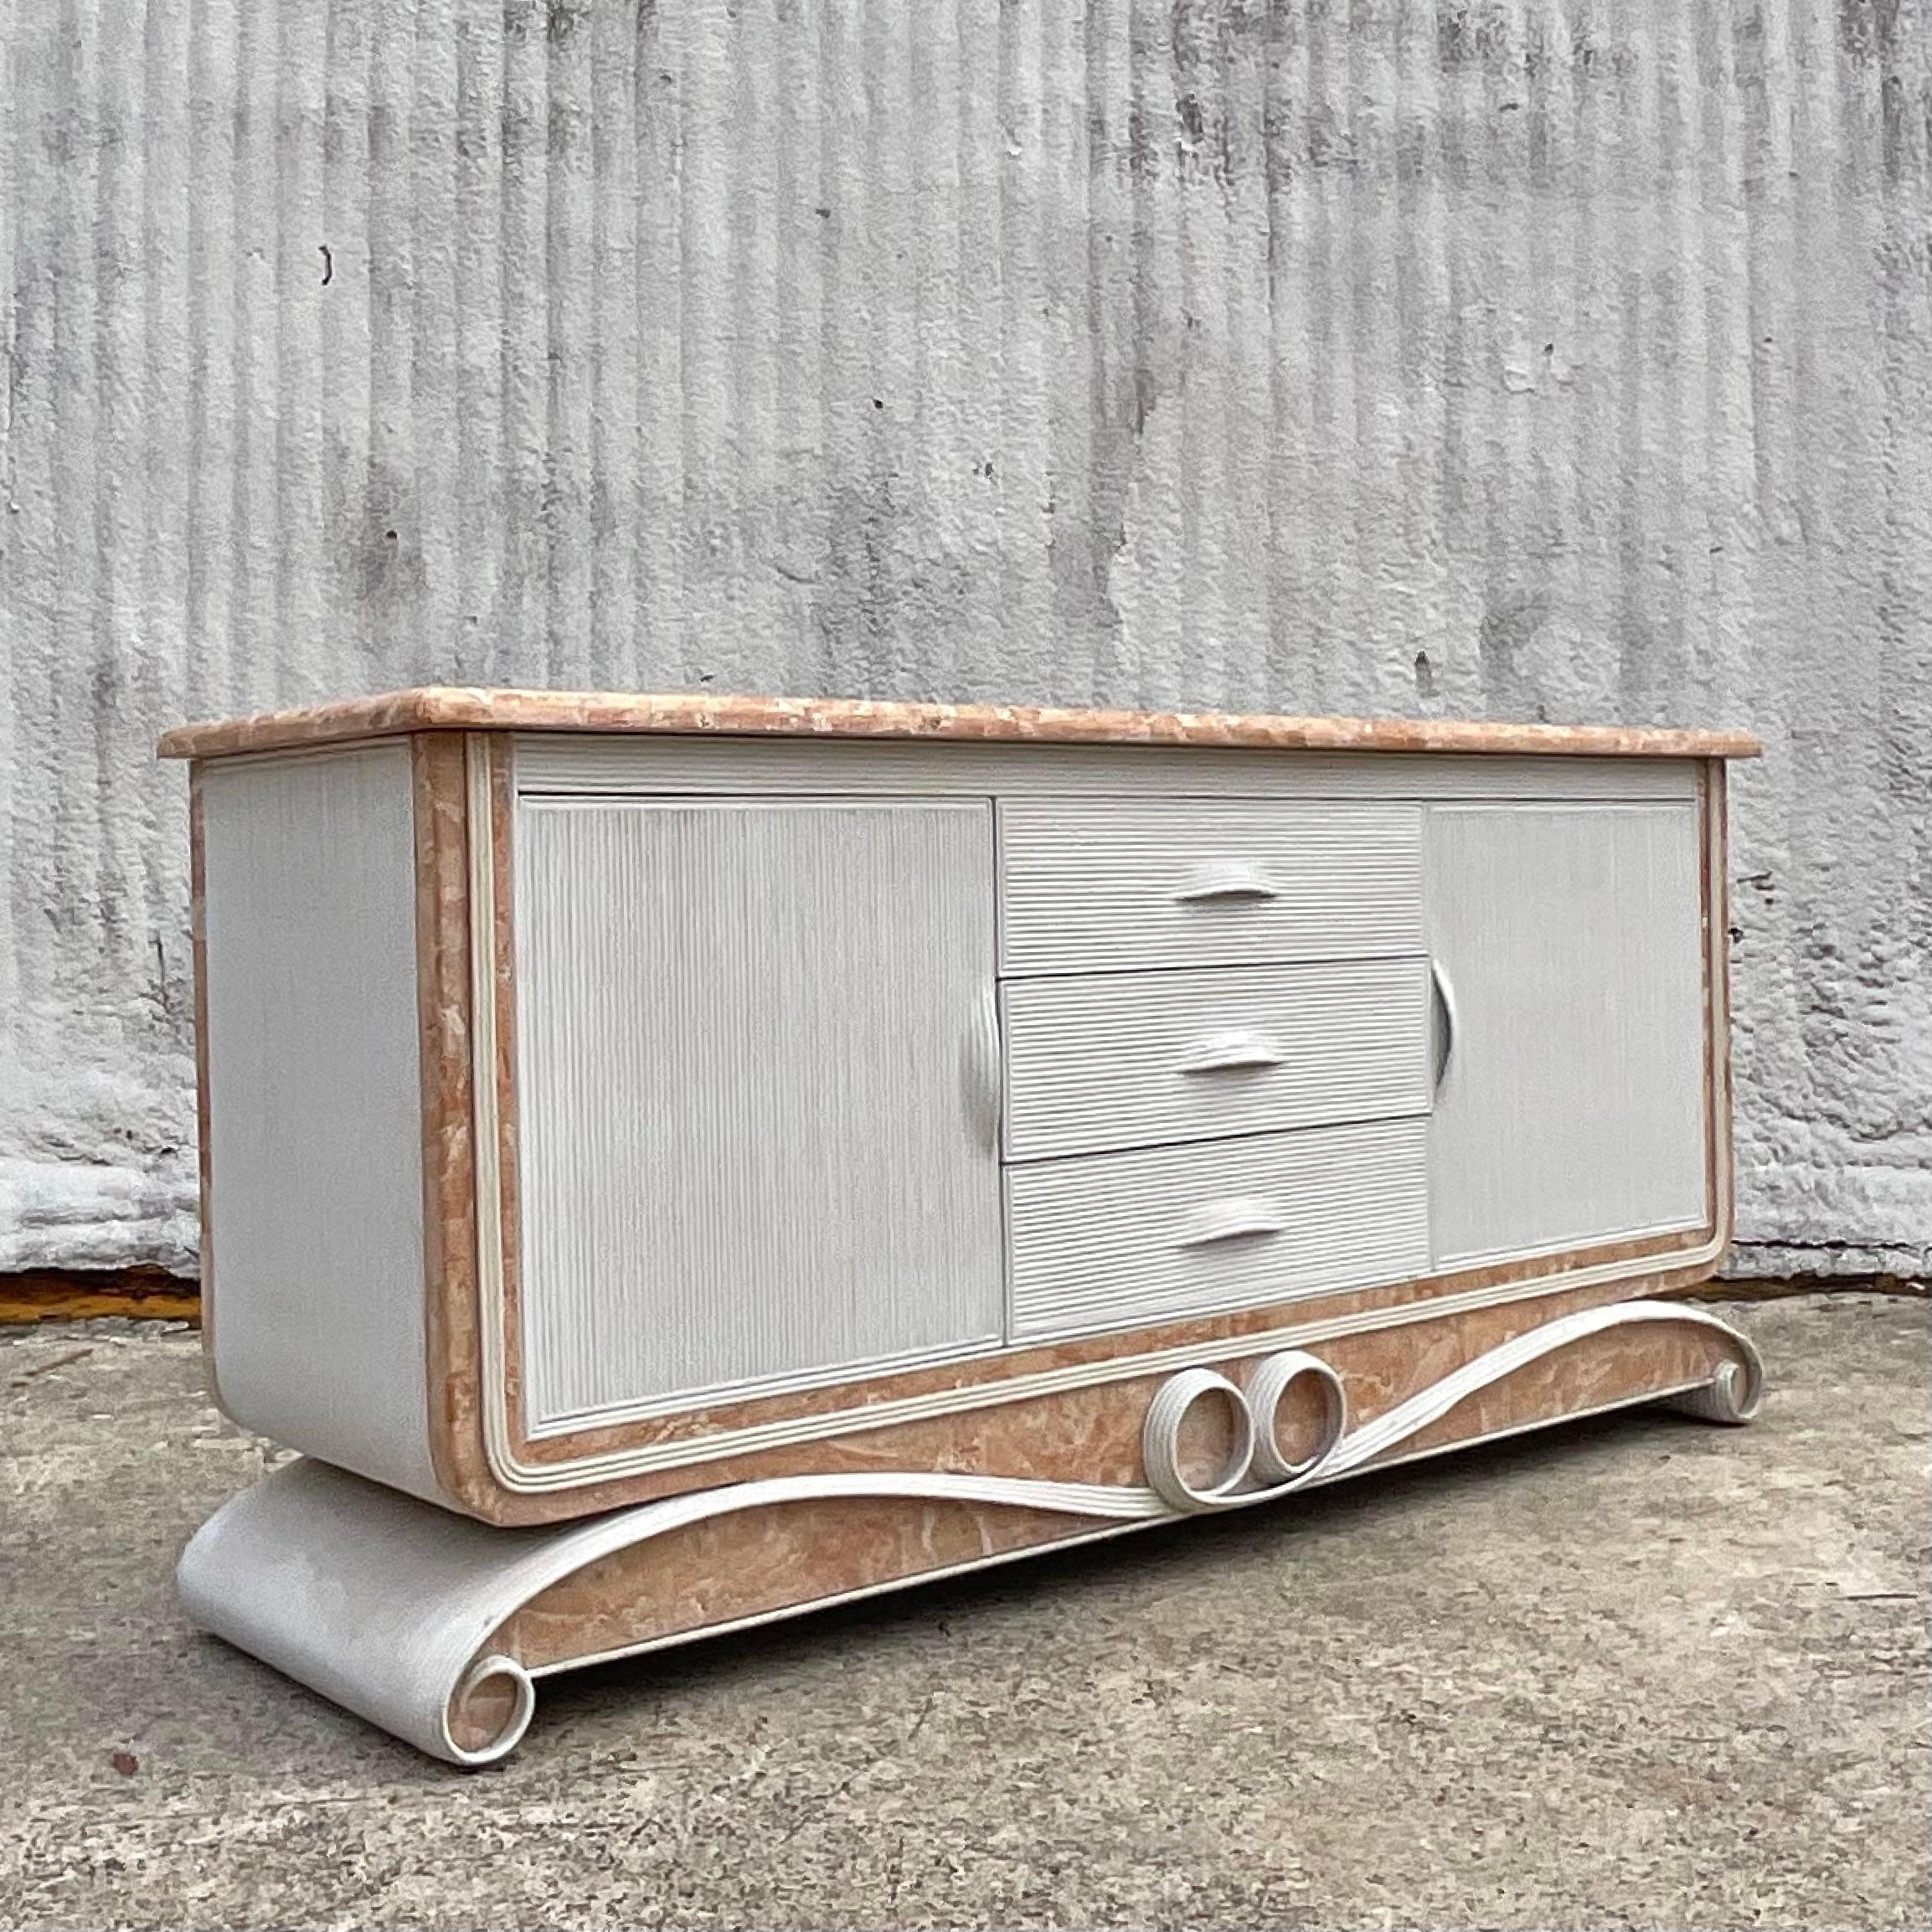 Introducing our Vintage Coastal Reed and tessellated Stone Credenza, a quintessential piece of American craftsmanship. Inspired by the rugged beauty of the coast, this credenza seamlessly combines natural reed and stone elements to evoke a sense of